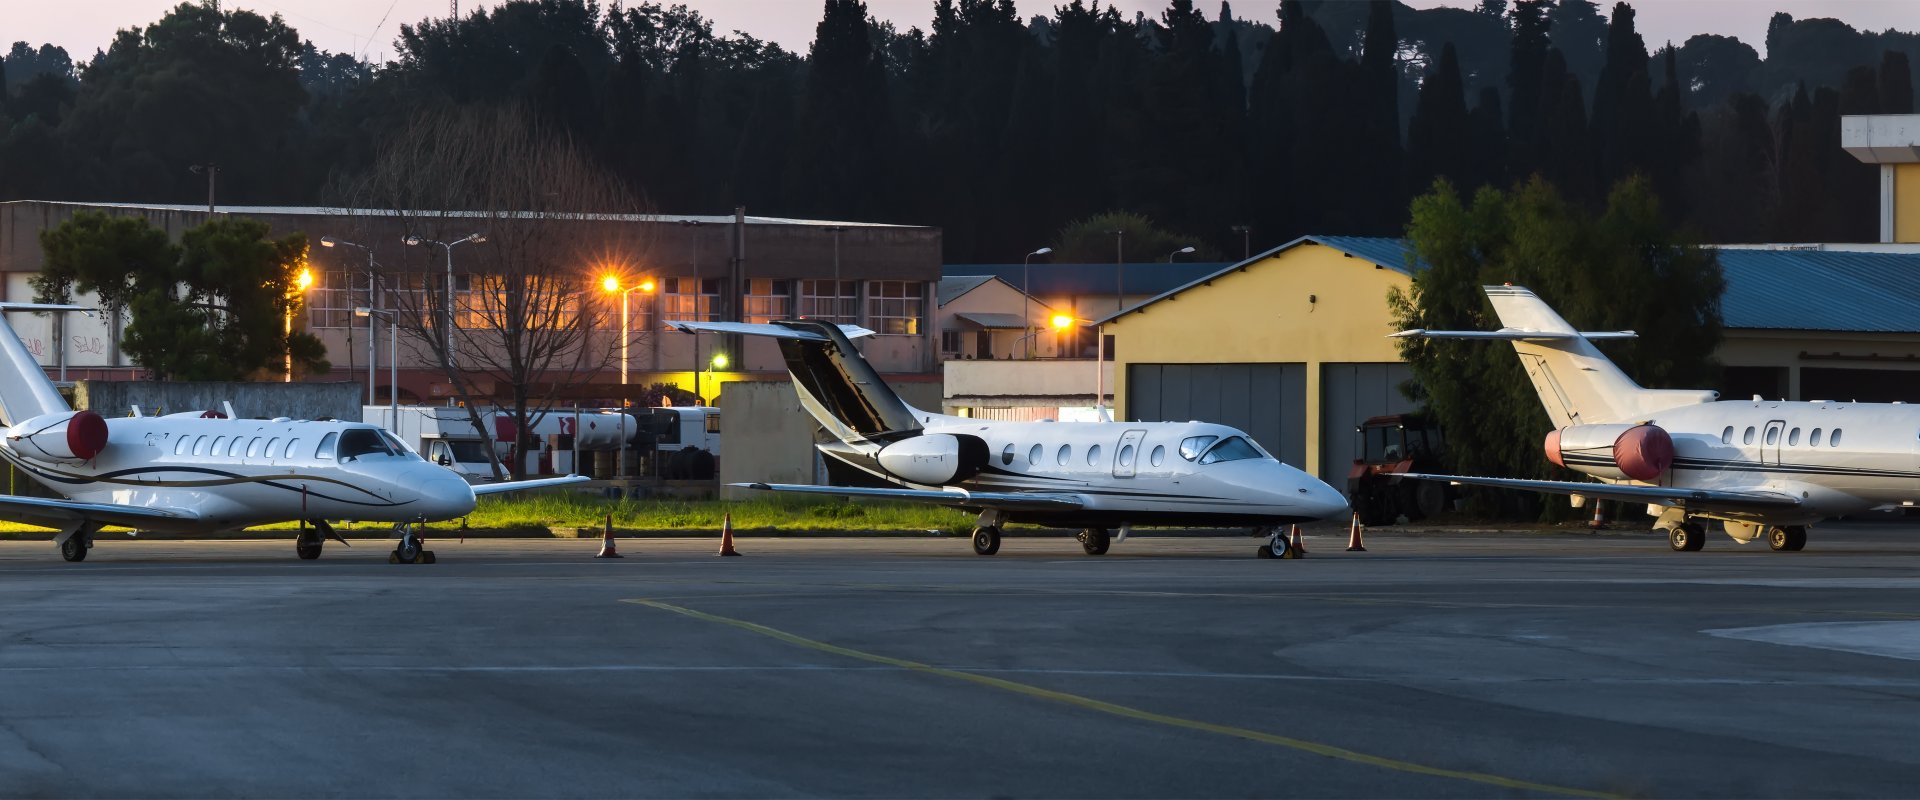 three private jets on stand parked at the airport